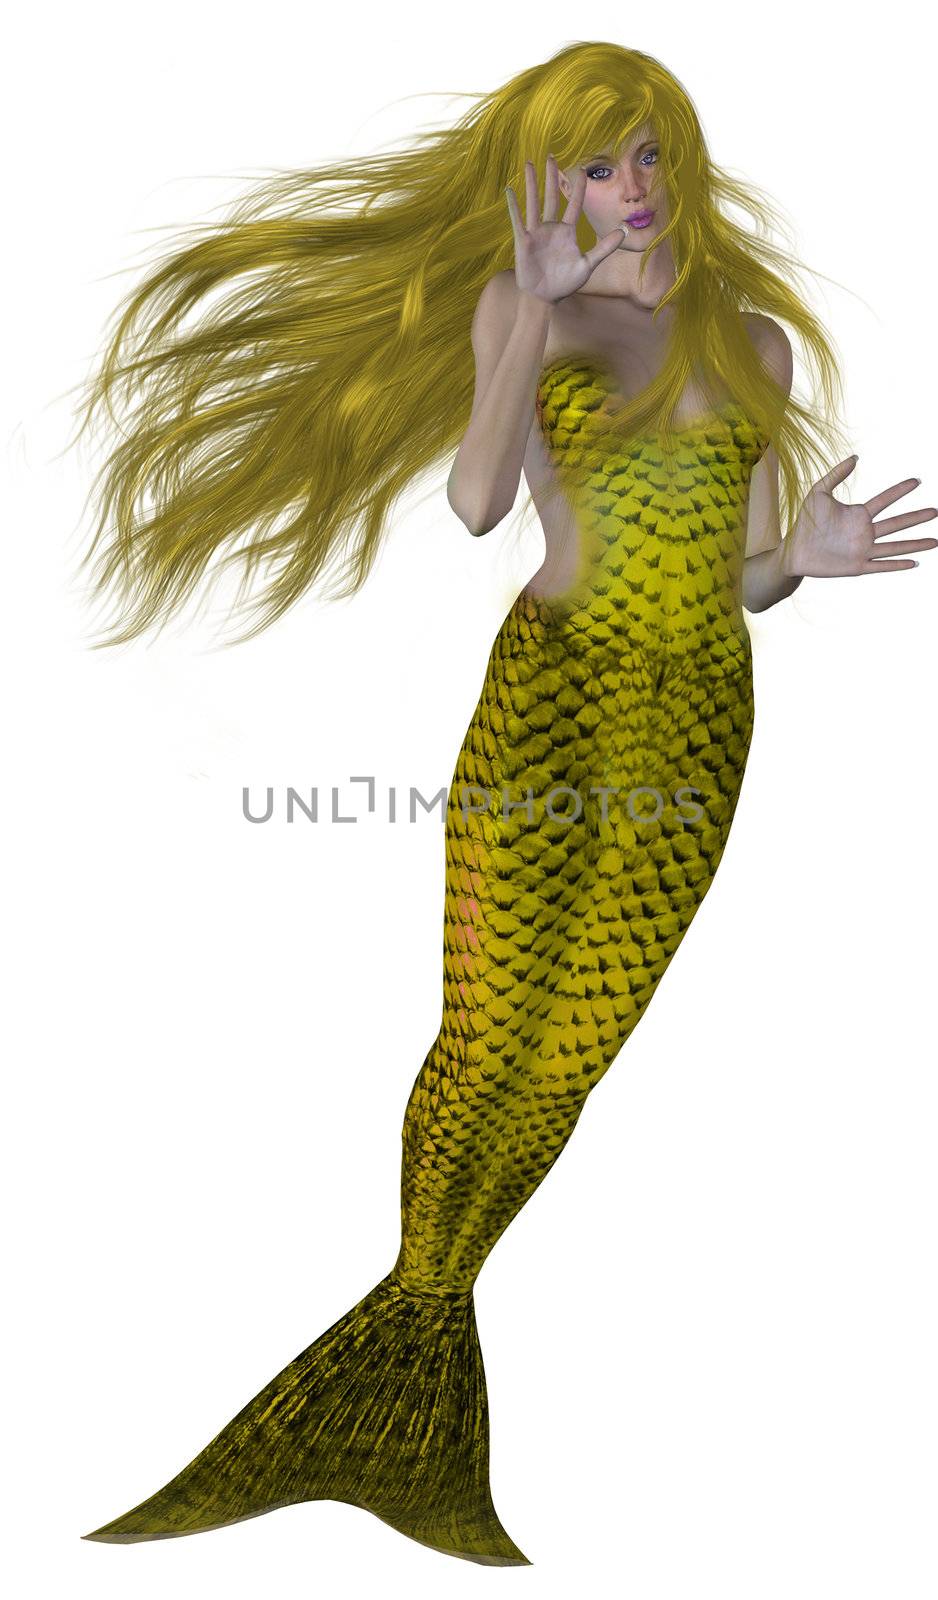 Yellow haired and tailed mermaid swimming